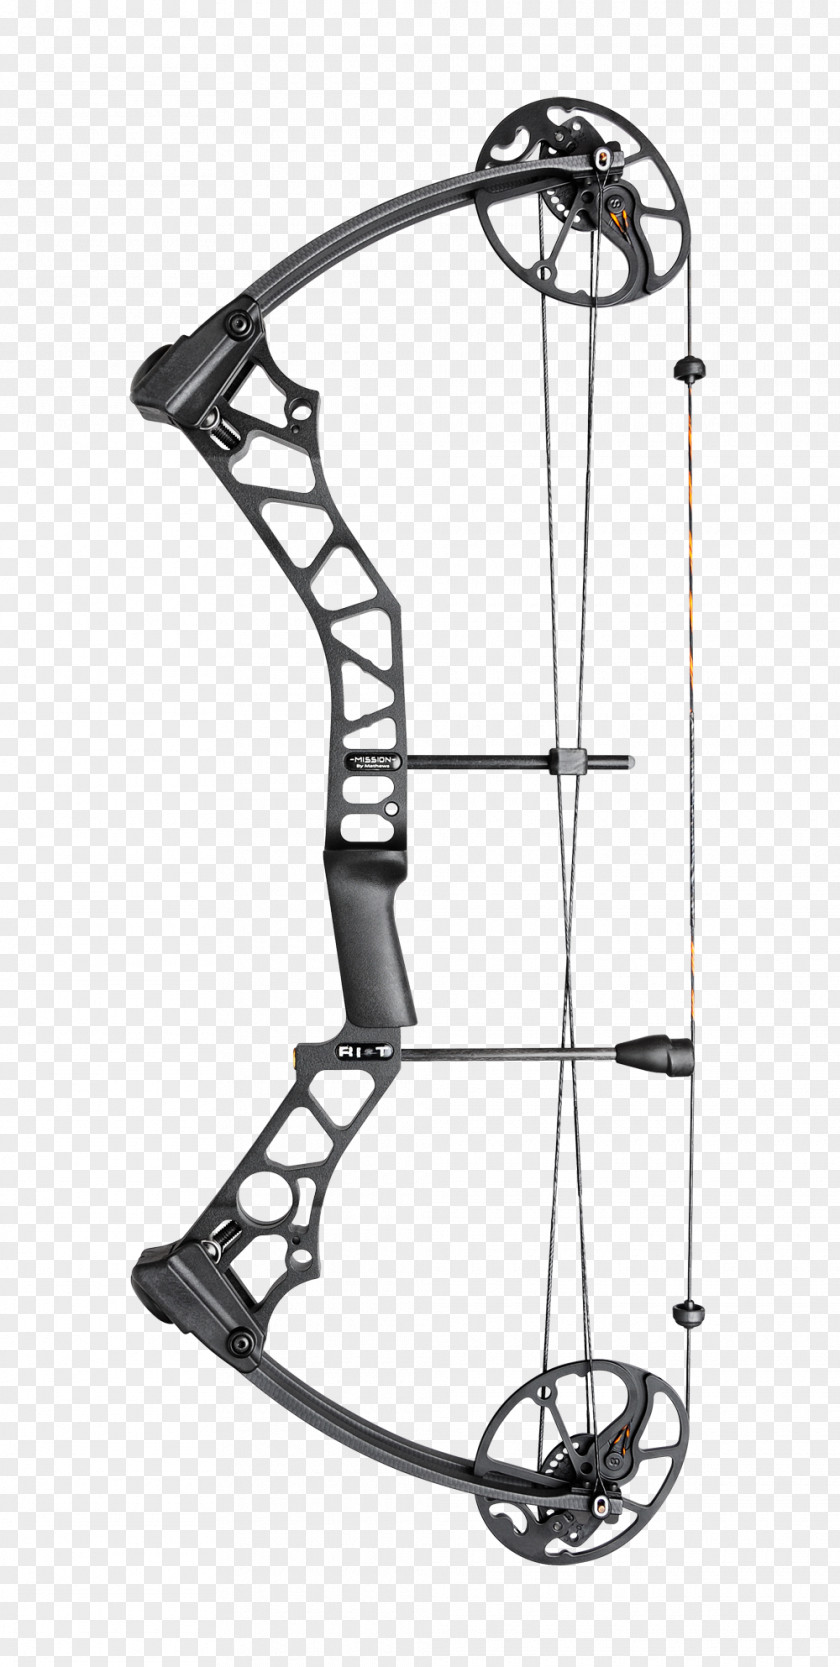 Archery Compound Bows Bow And Arrow Hunting PNG